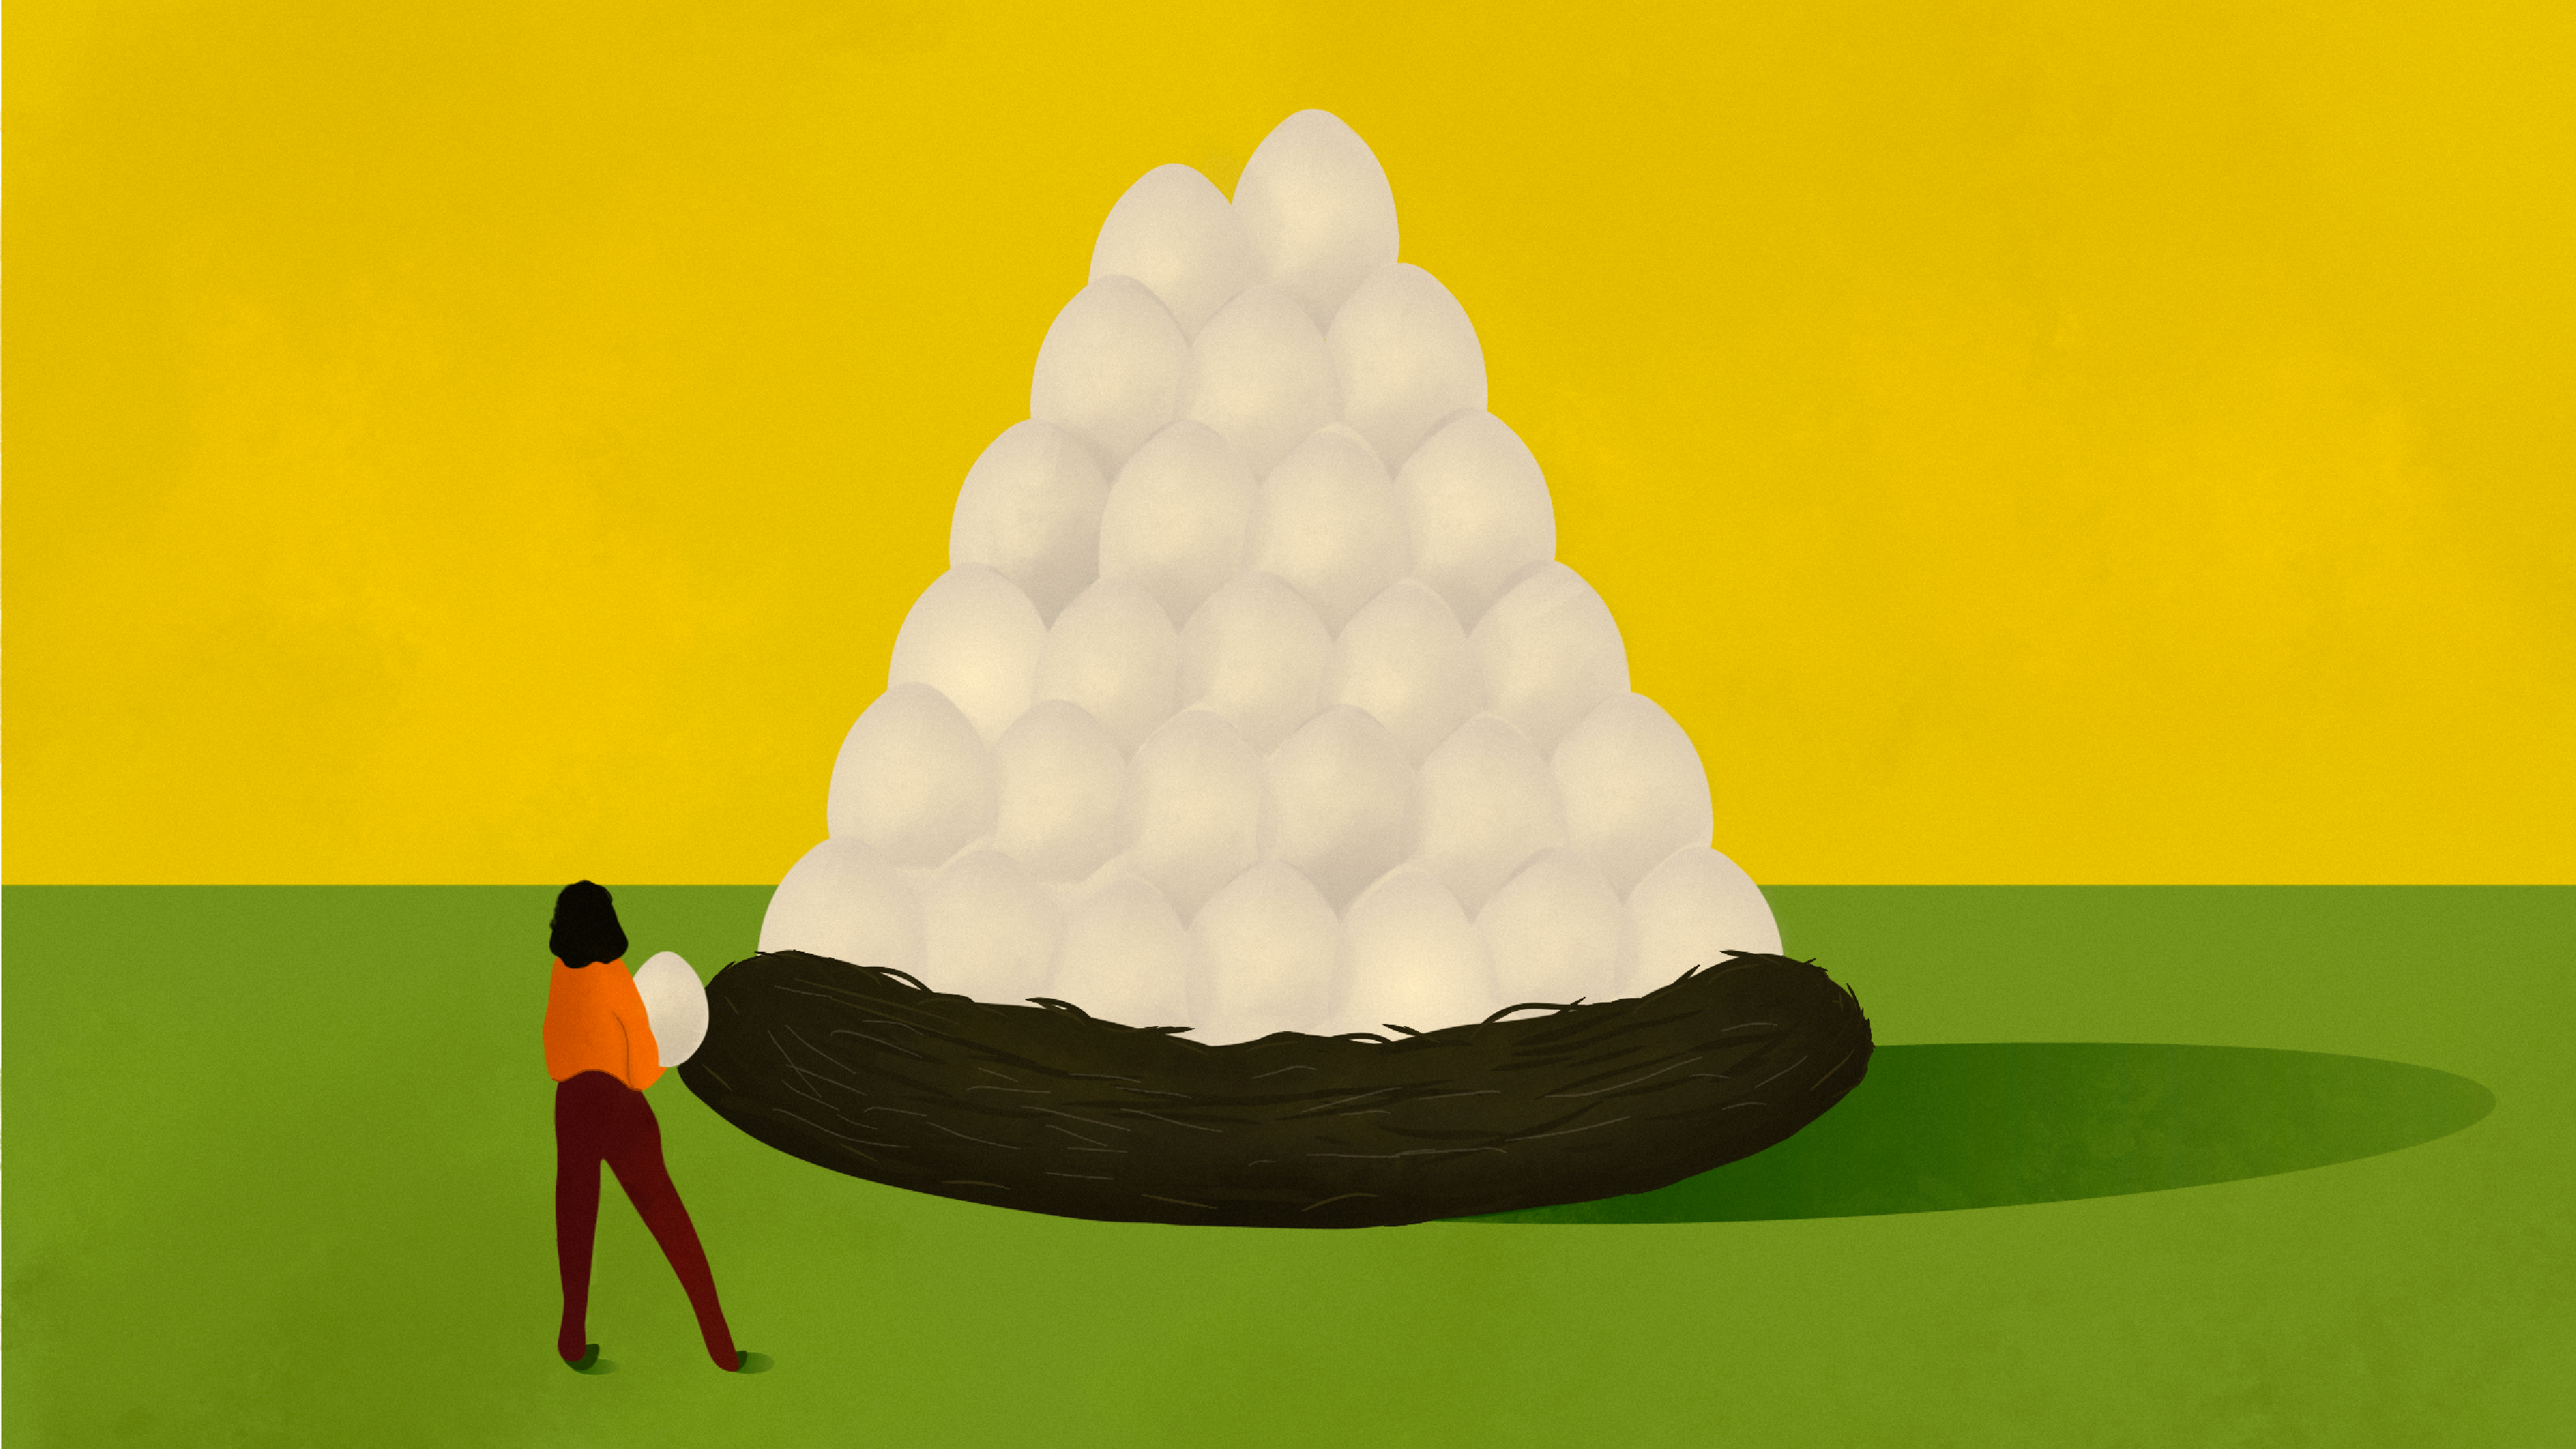 Illustration of eggs stacked in a nest, with a person holding one egg and looking at the stack